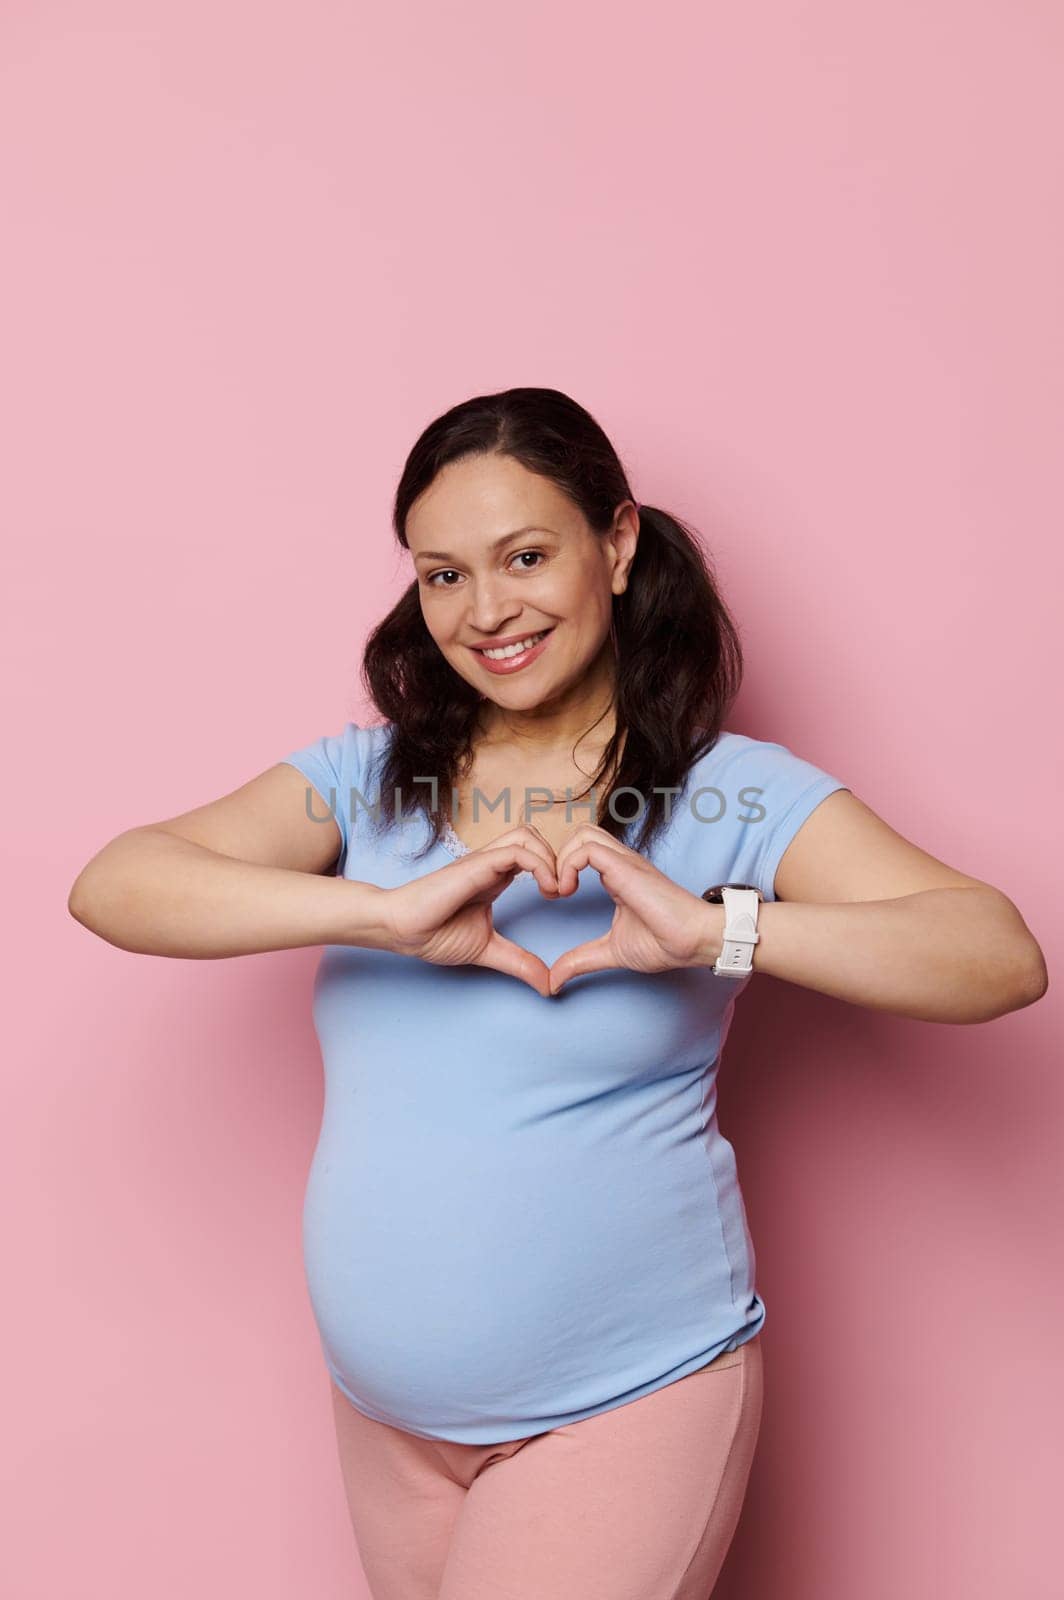 Joyful pregnant woman gestures with hands, showing heart shape with fingers, smiles looking at camera, isolated on pink by artgf